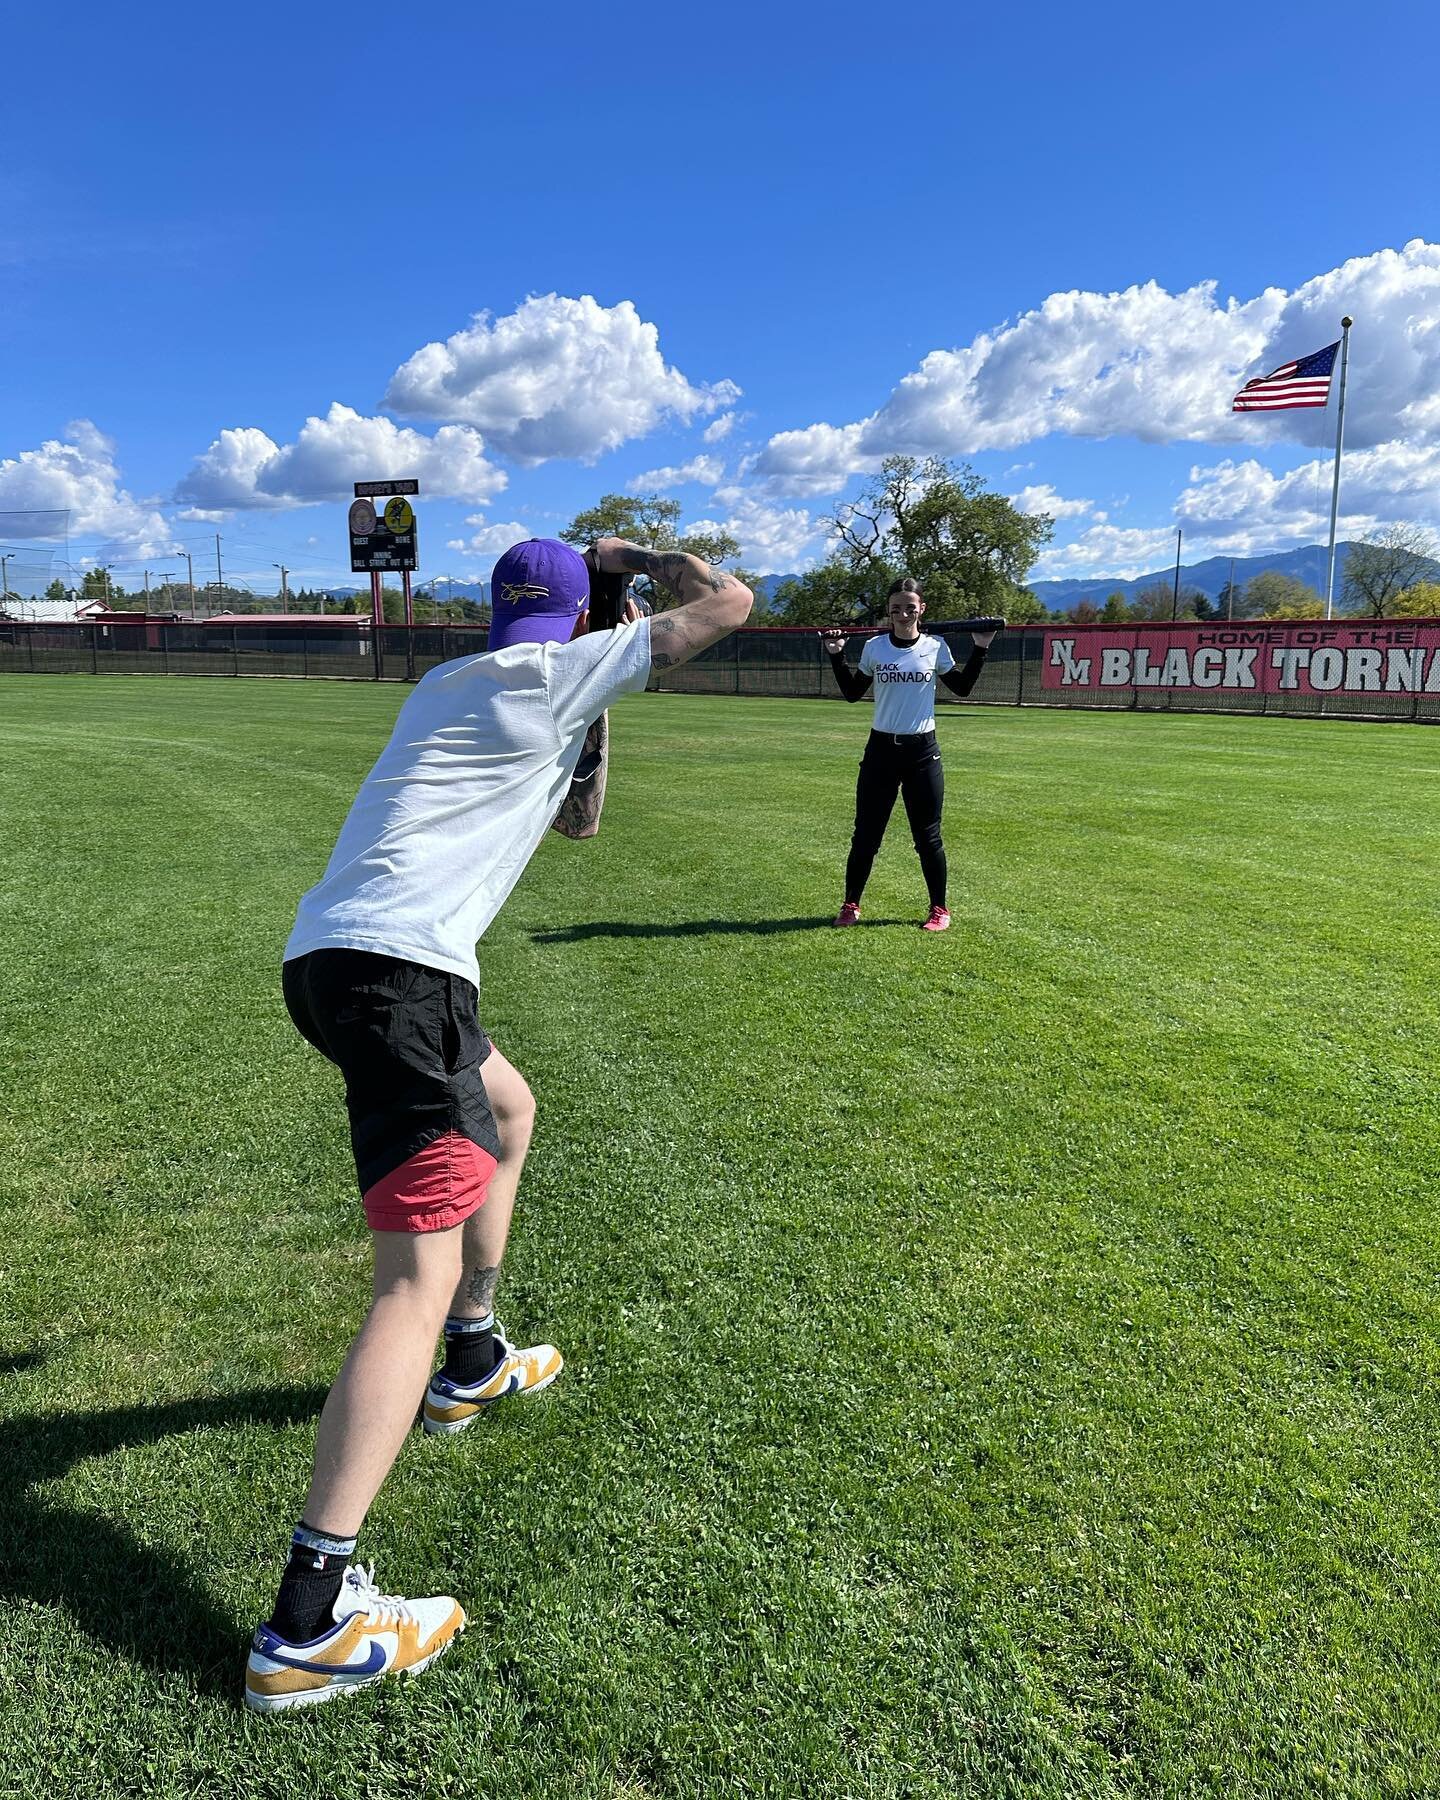 Some BTS for our upcoming issue featuring North Medford Softball&rsquo;s incredible @taya.petty 🥎🌪️
.
We hope you&rsquo;re enjoying Issue 005! 🙏🏽